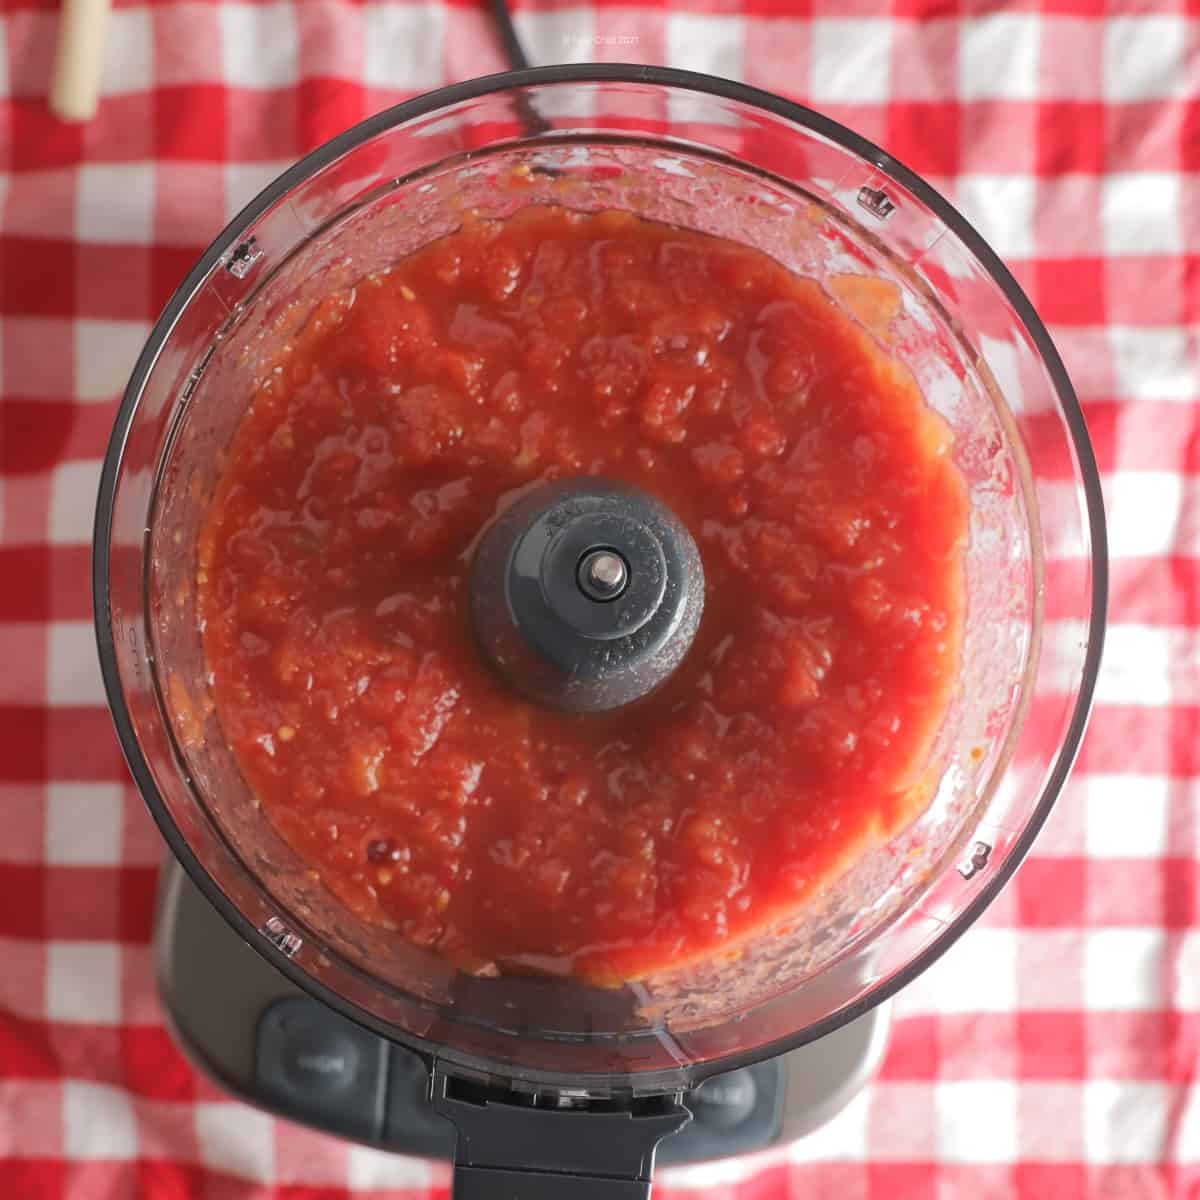 Stewed tomatoes after being pulsed 4-5 times in a food processor